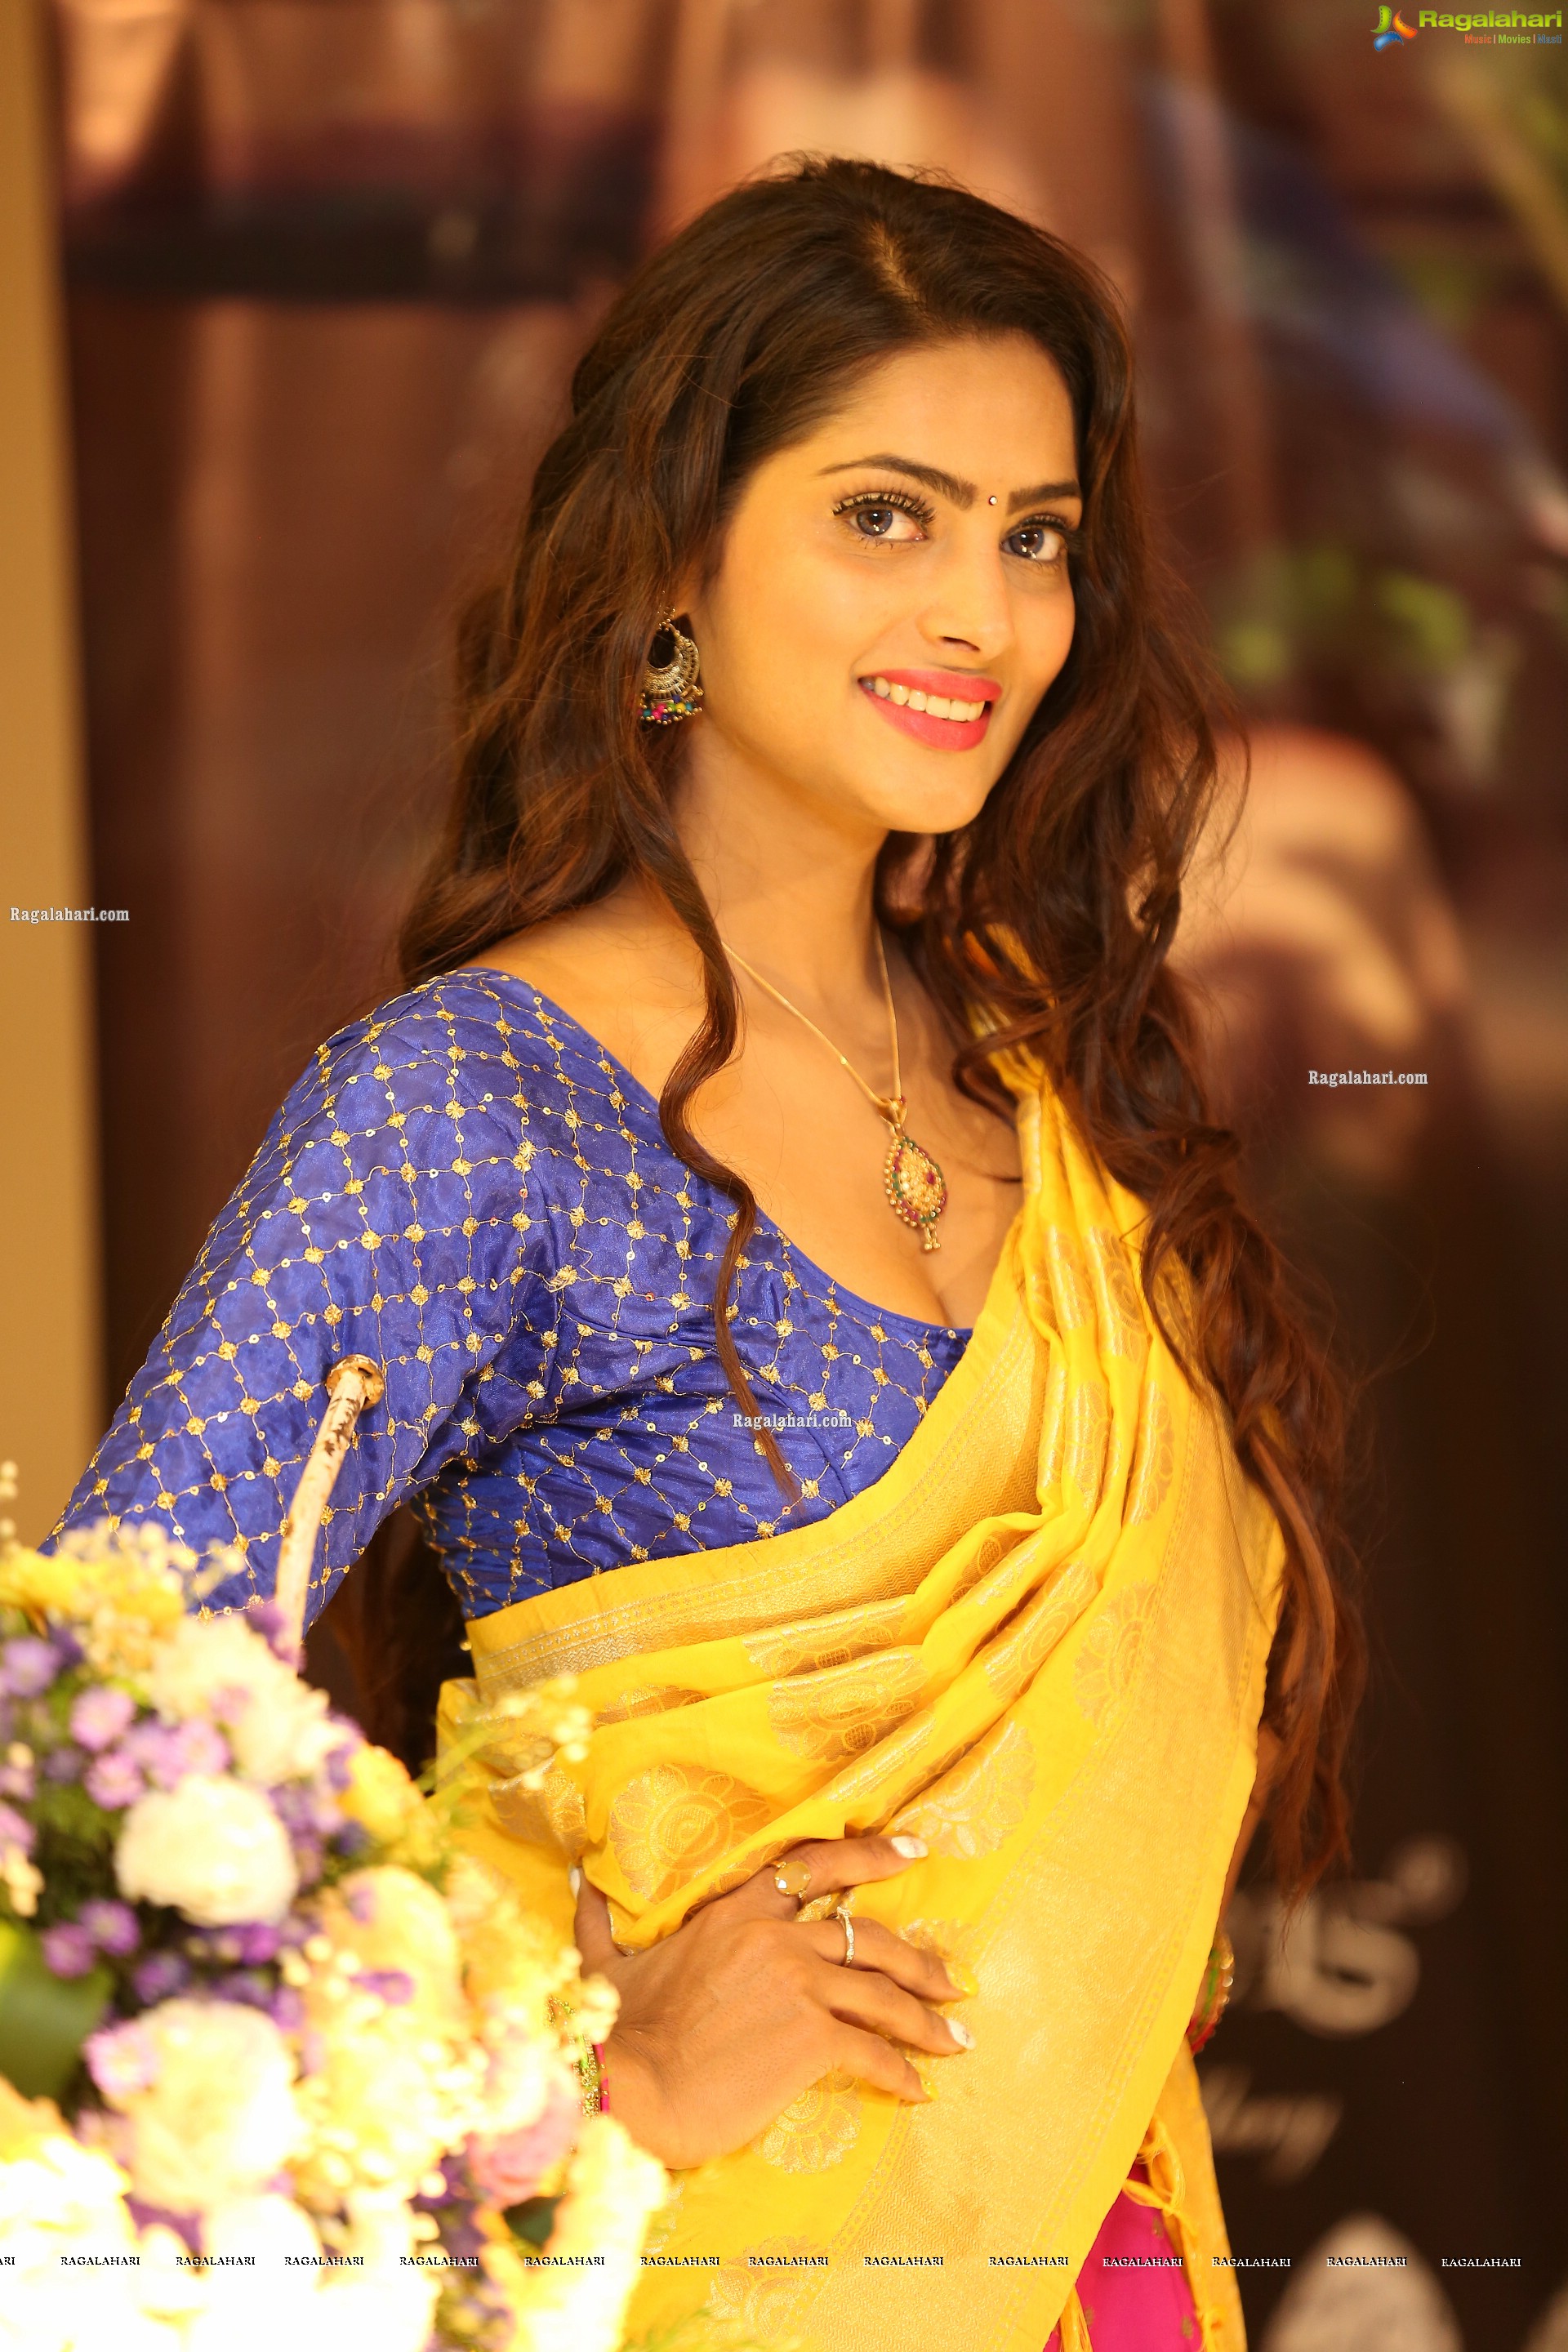 Sherry Agarwal Gorgeous Stills in Pink Lehenga and Blue Blouse with Yellow Voni, HD Photo Gallery